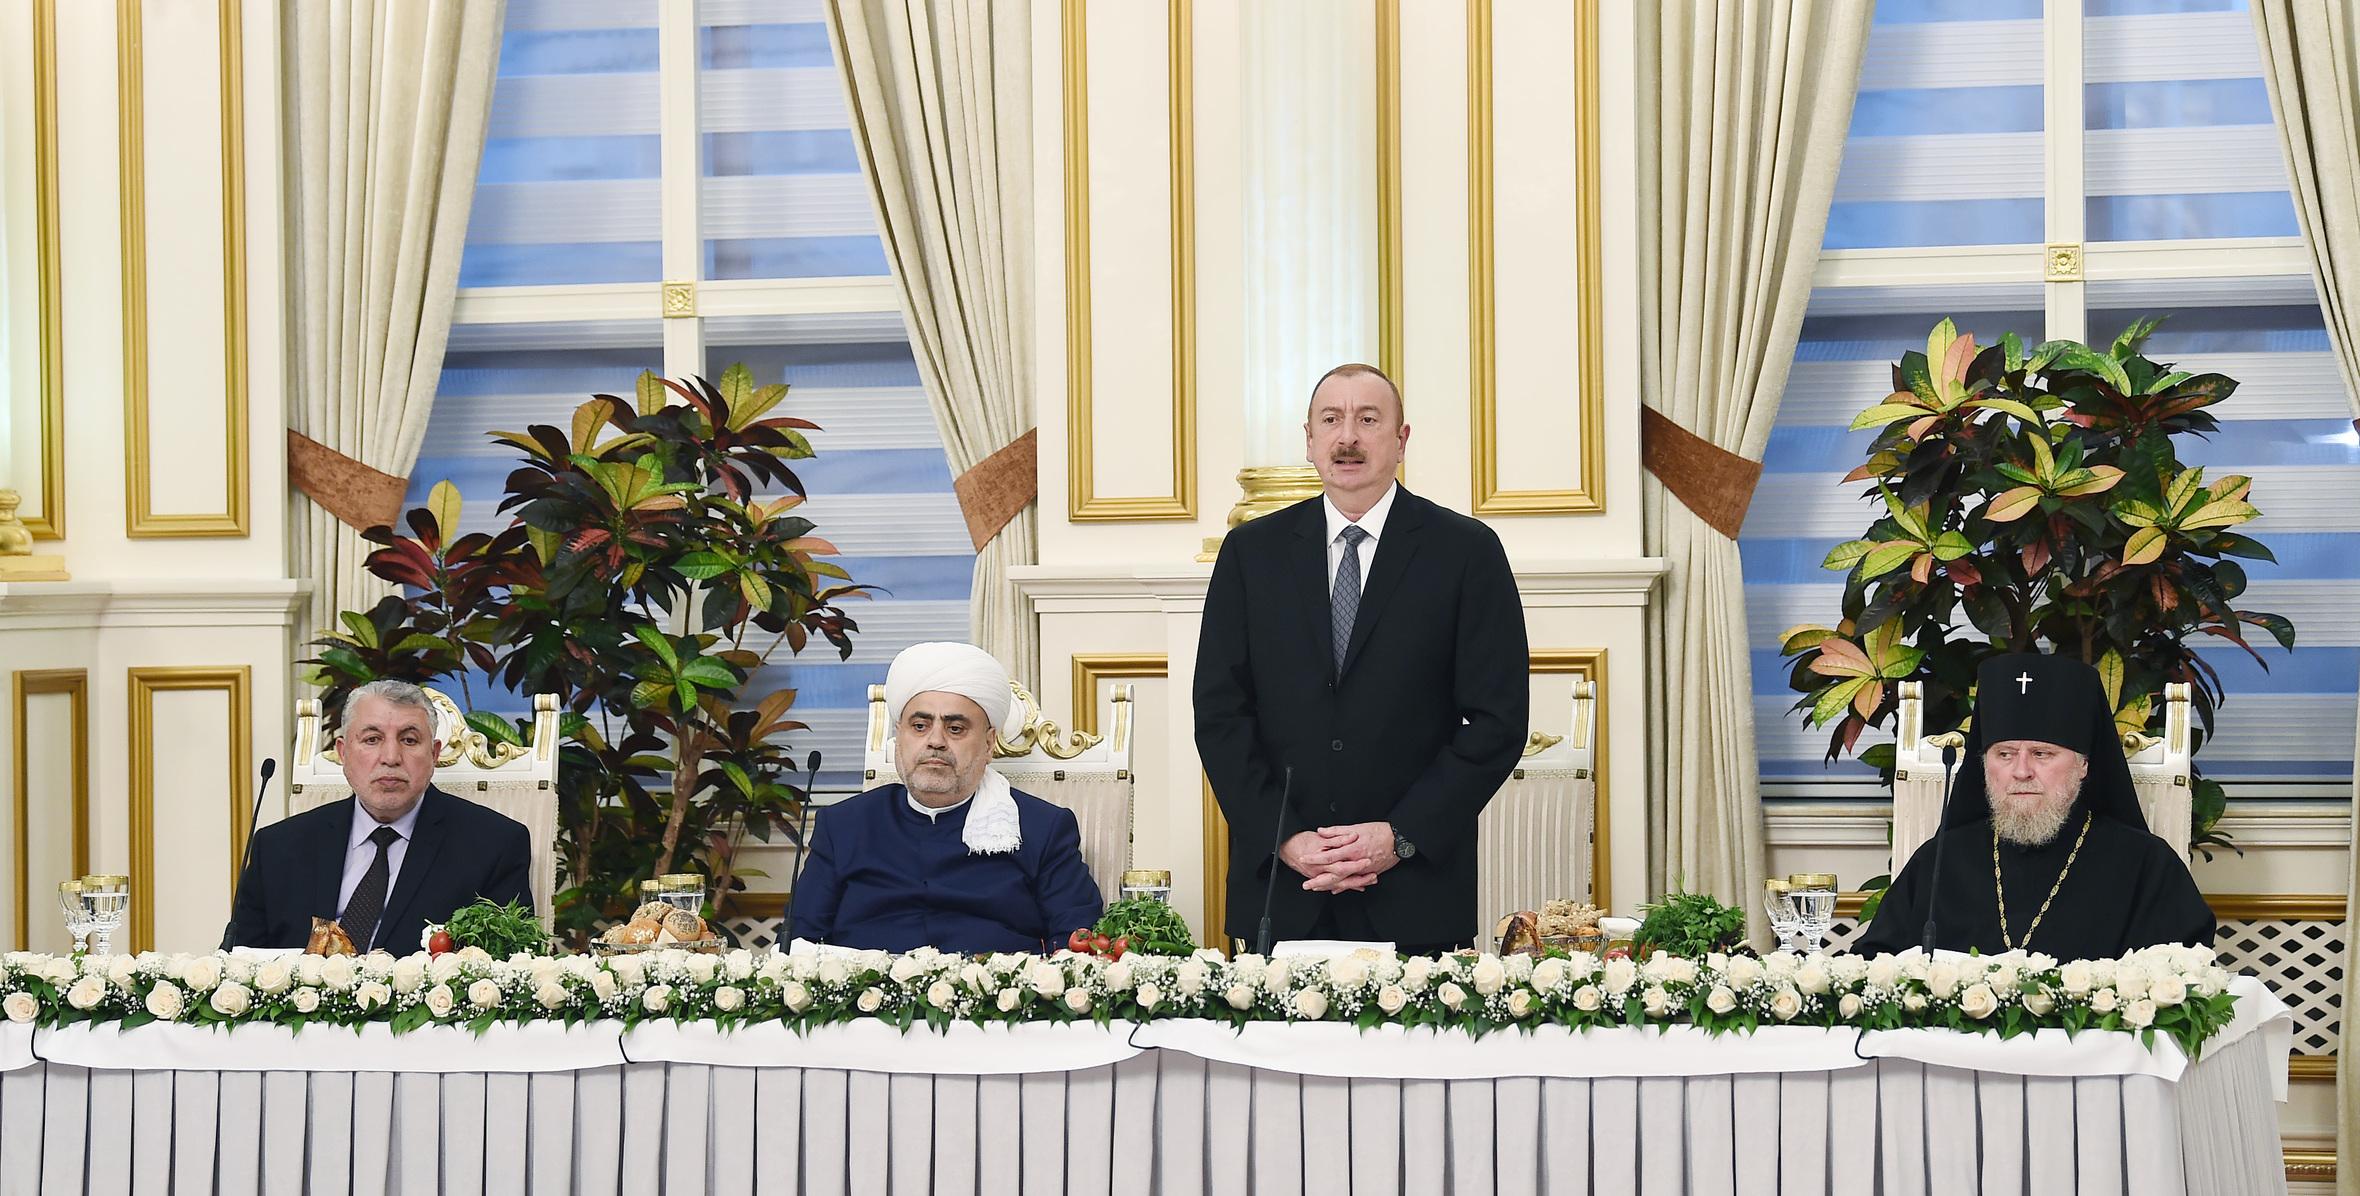 Speech by Ilham Aliyev at the Iftar ceremony on the occasion of holy month of Ramadan